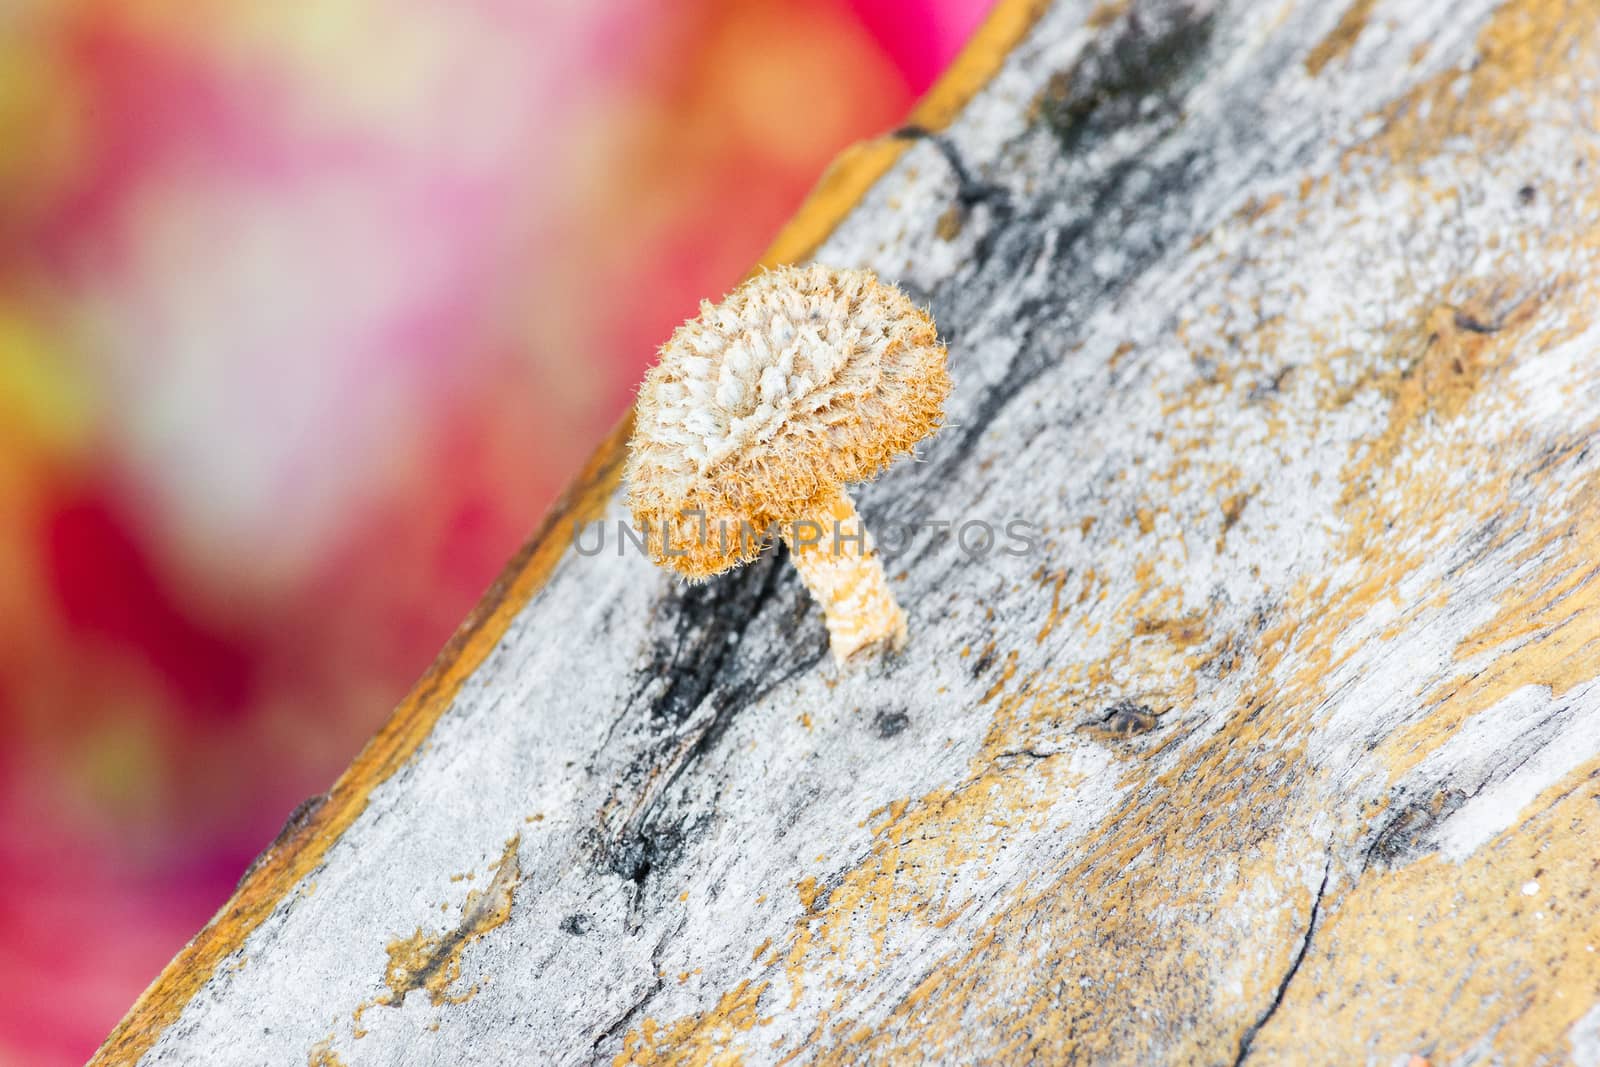 Fungi on tree.With blurred colorful background.